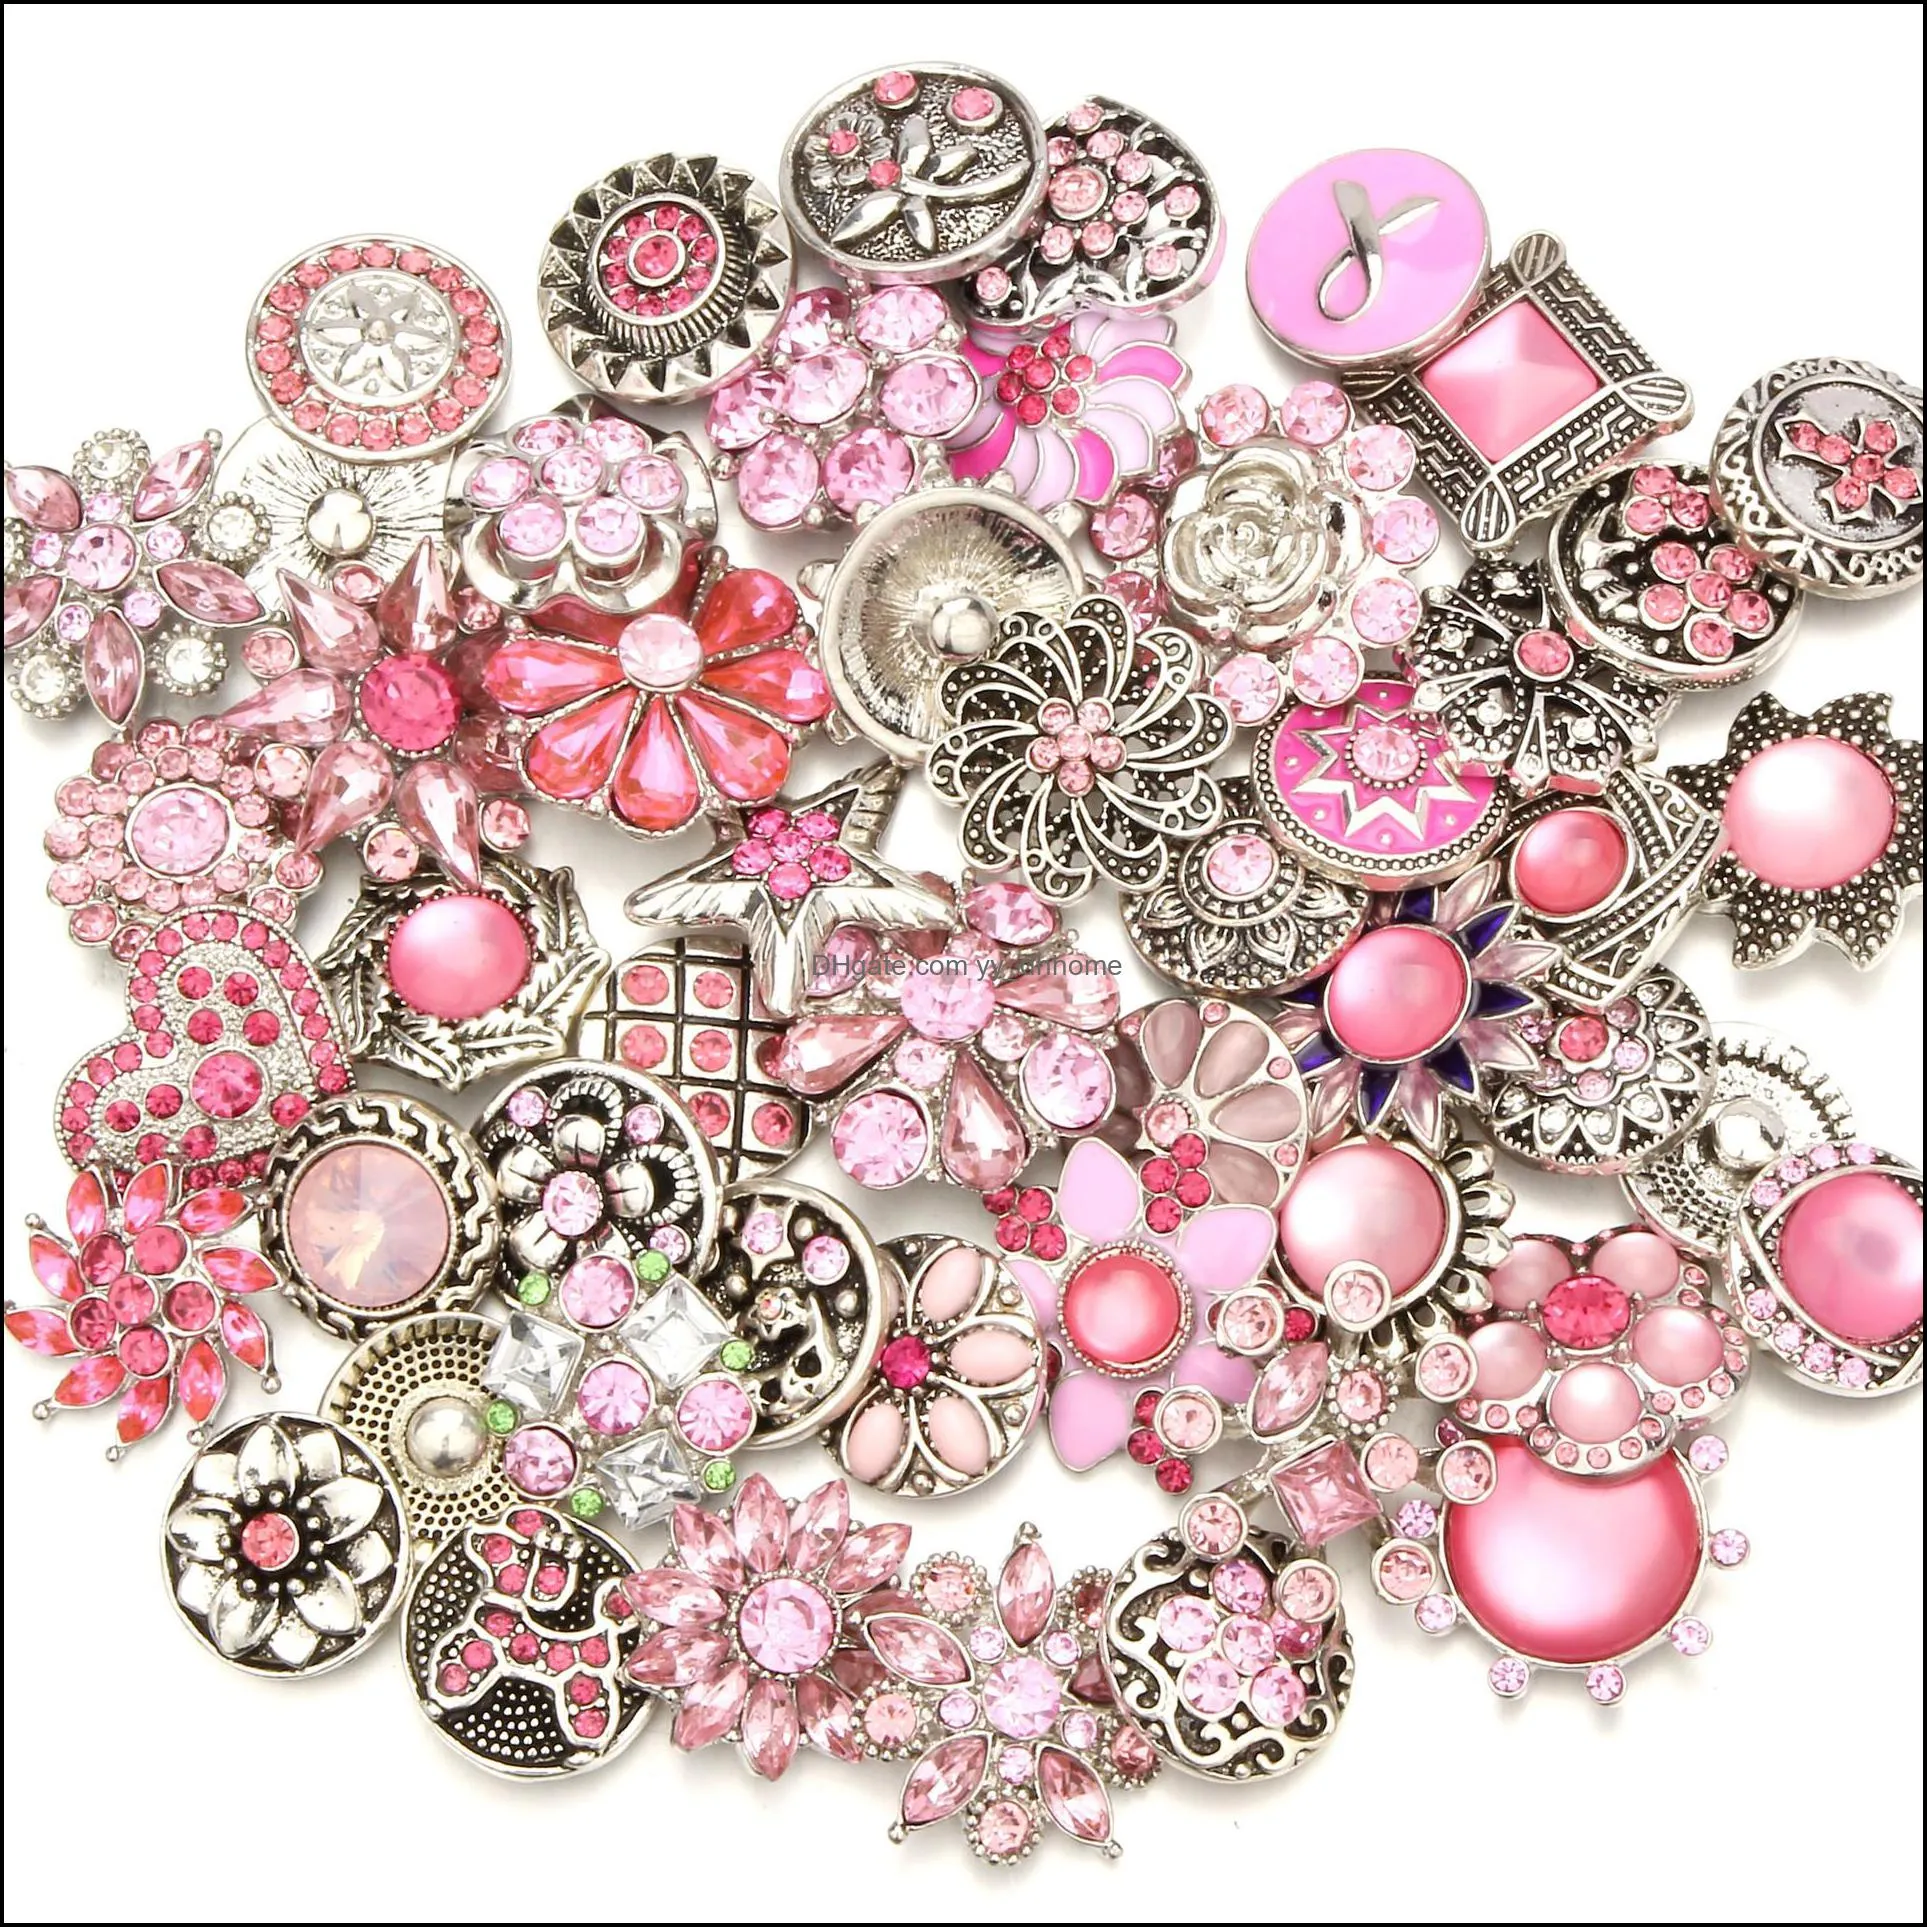 wholesale 18mm snap button jewelry components mixed color rhinestone flower metal snaps buttons fit diy bracelet necklace noosa b100